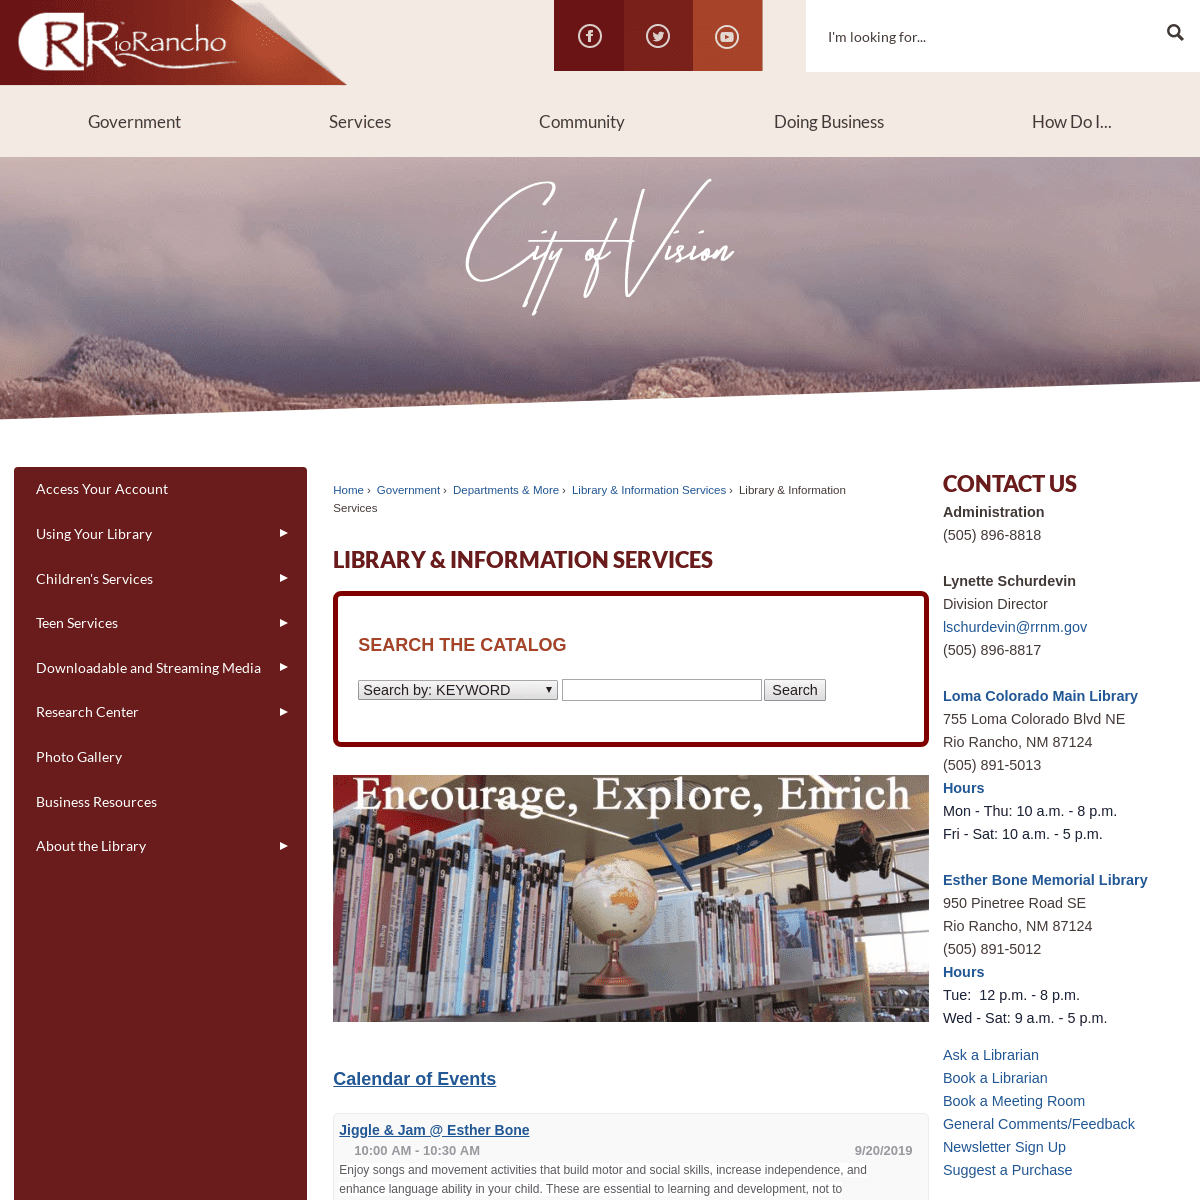 Library & Information Services | The Official Site of Rio Rancho, NM